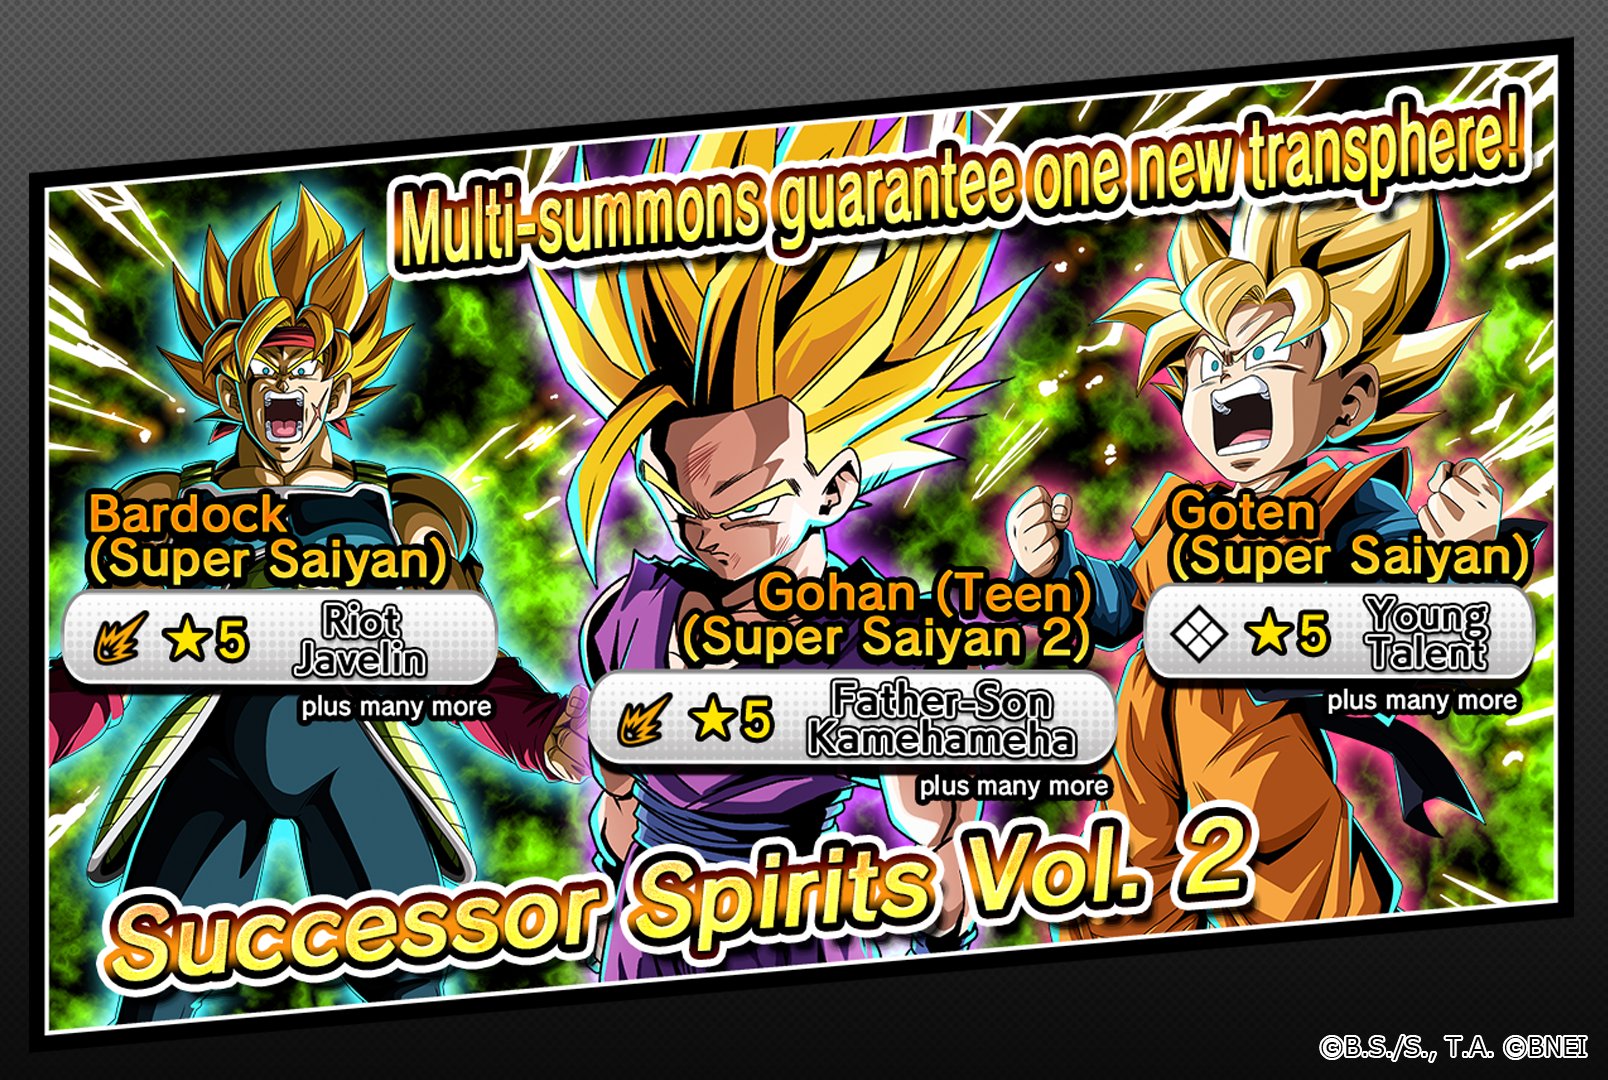 Dragon Ball the Breakers October 8th-10th Last Beta Trial With Rewards!!! :  r/dbxv